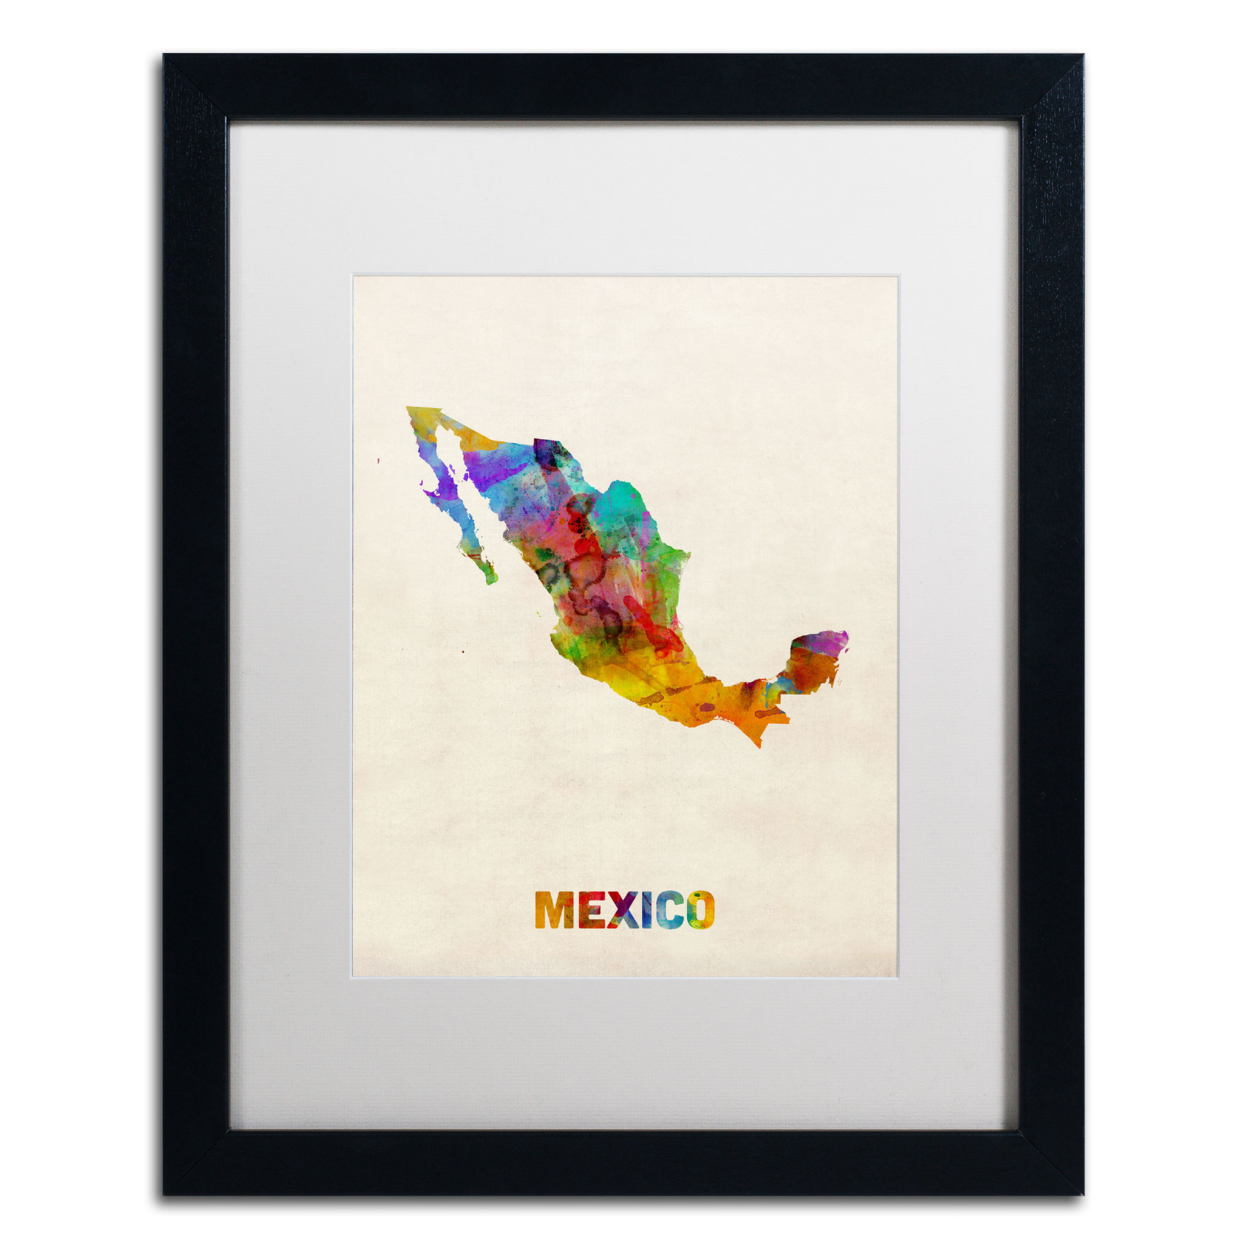 Michael Tompsett 'Mexico Watercolor Map' Black Wooden Framed Art 18 X 22 Inches